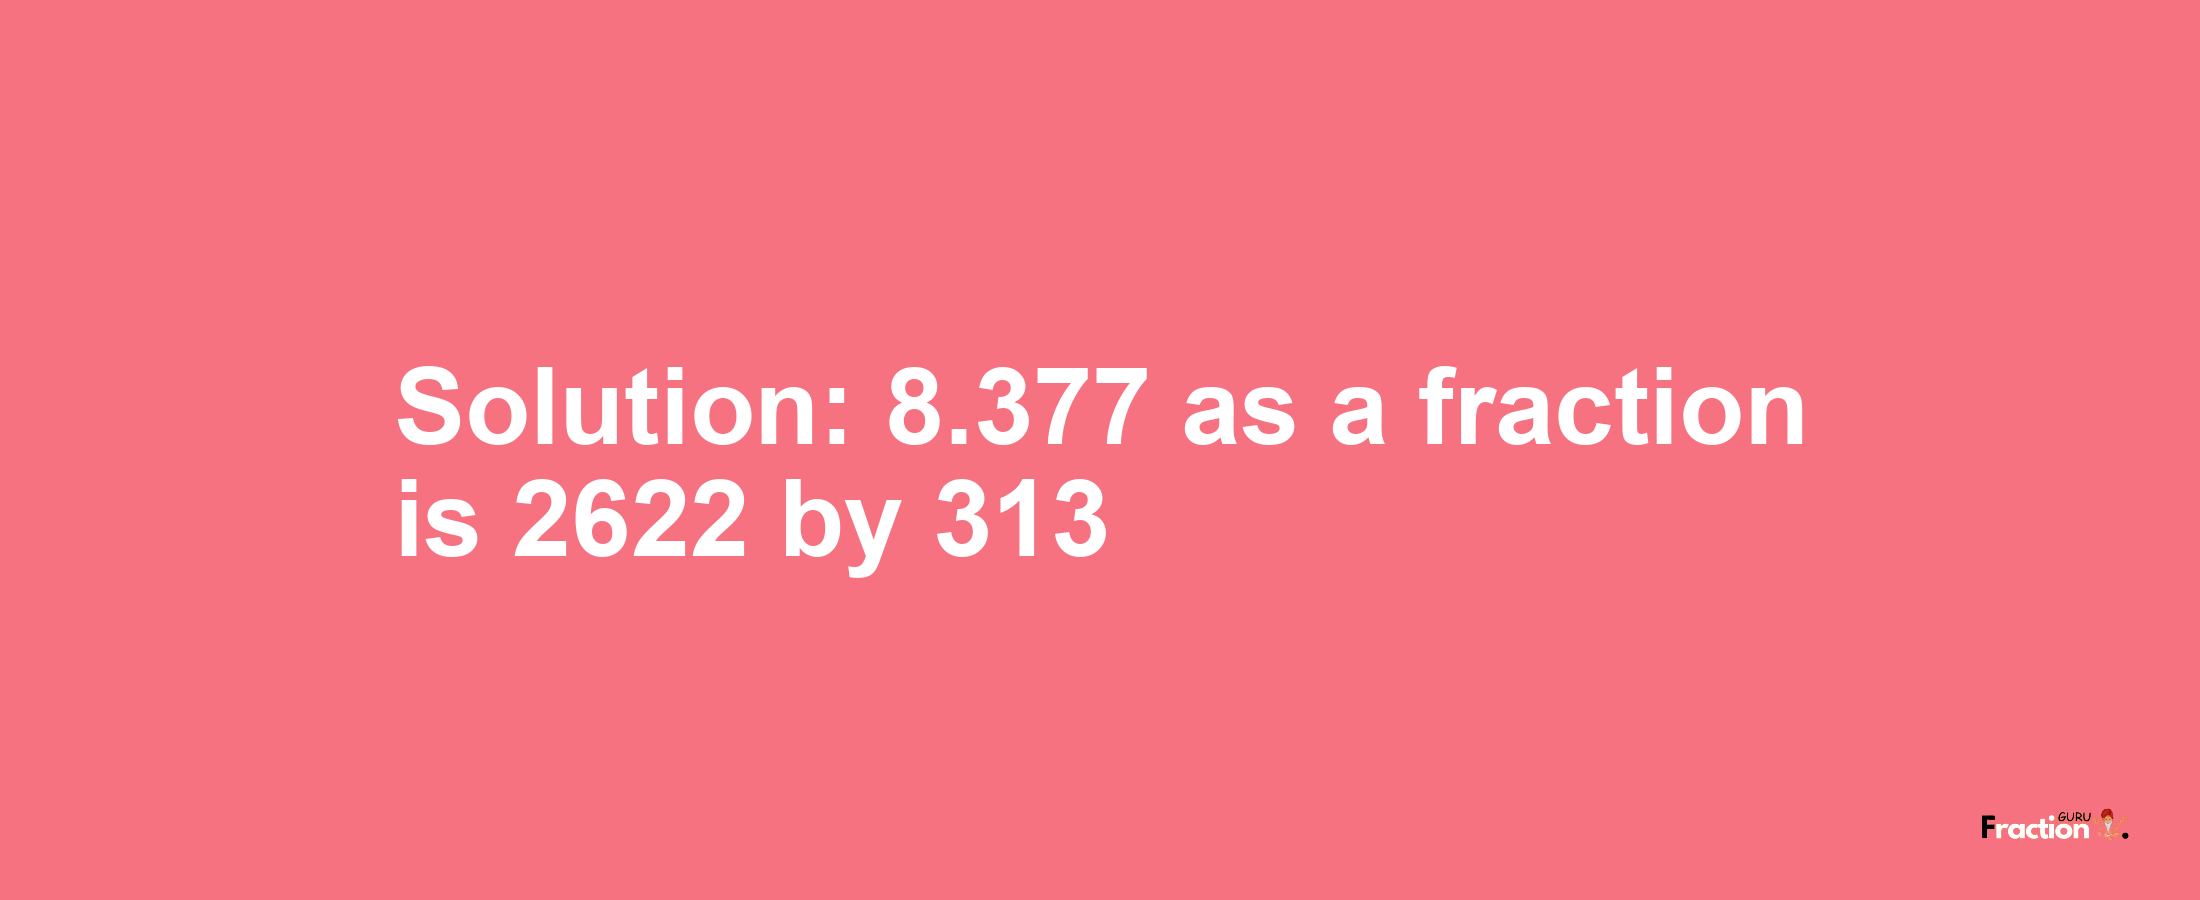 Solution:8.377 as a fraction is 2622/313